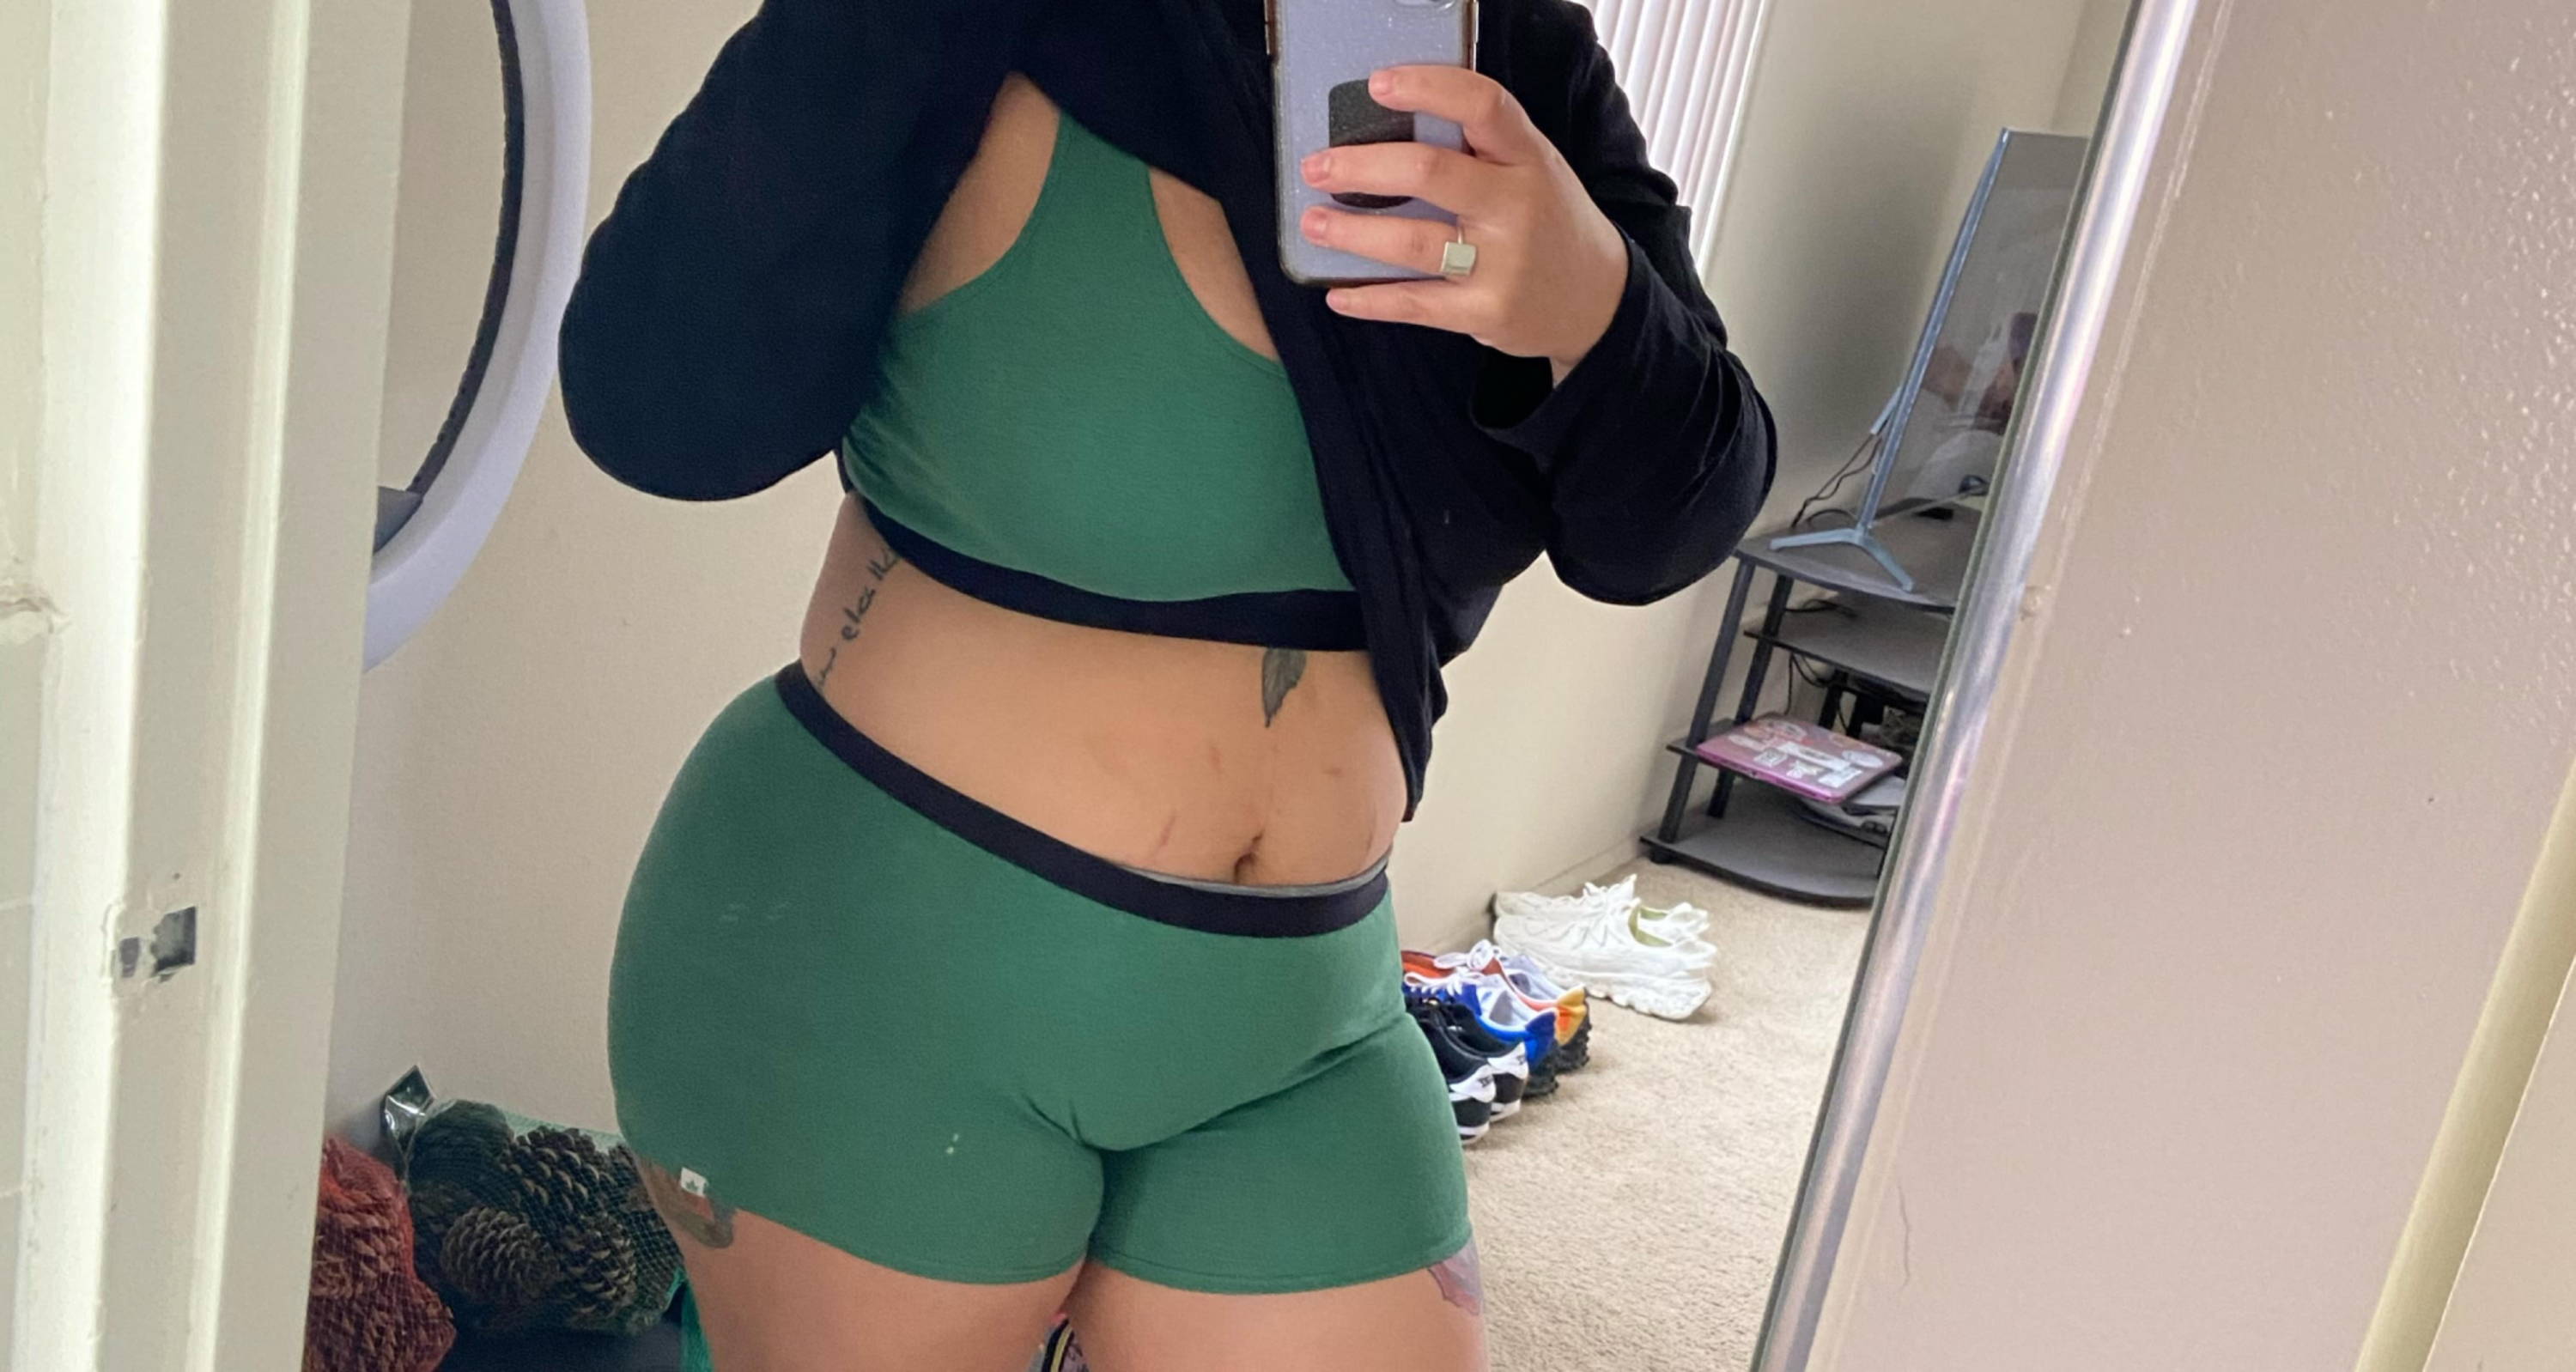 woman taking a mirror selfie with her tongue out, showing off a green bralette